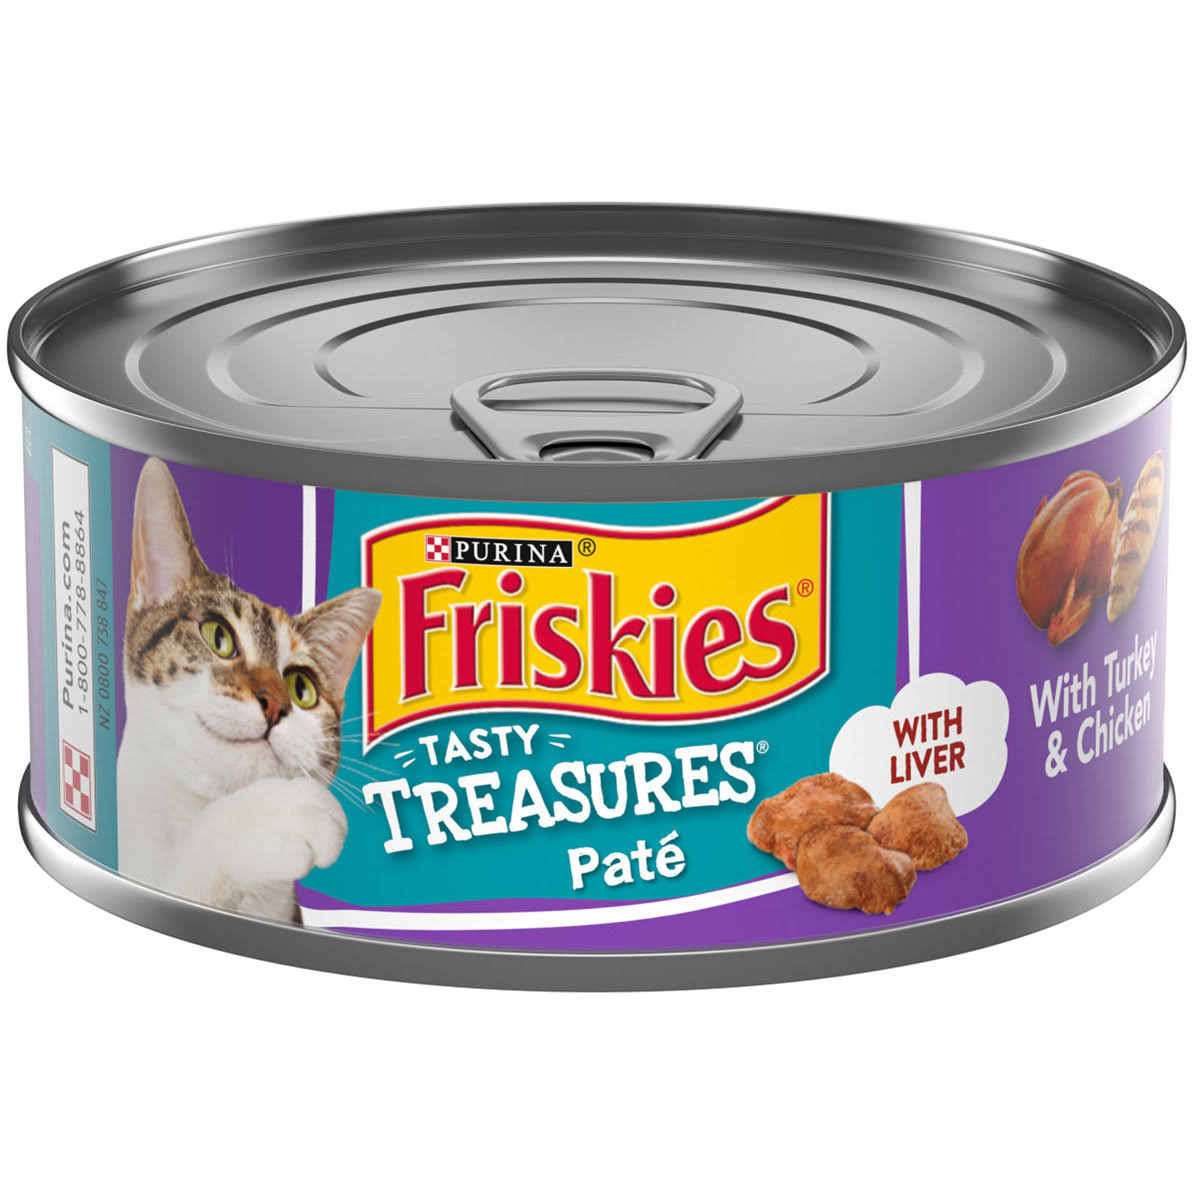 Purina Friskies Tasty Treasures Turkey and Chicken Dinner with Cheese Paté Cat Food - 5.5oz